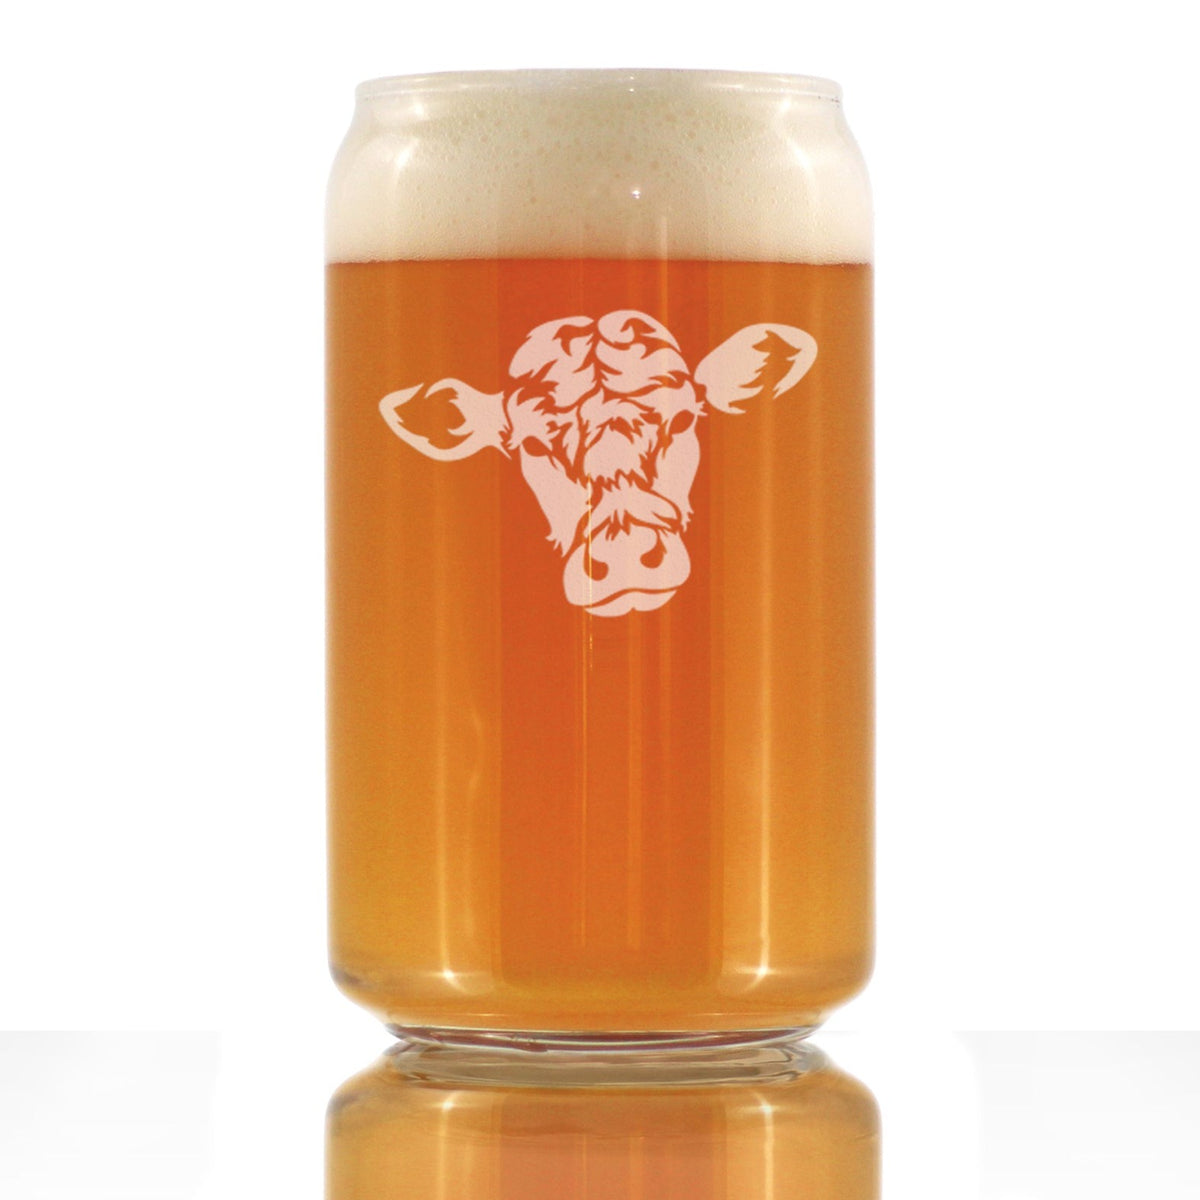 Cow Face Beer Can Pint Glass - Western Themed Farm Decor and Gifts for Cowboys and Girls - 16 Oz Glasses